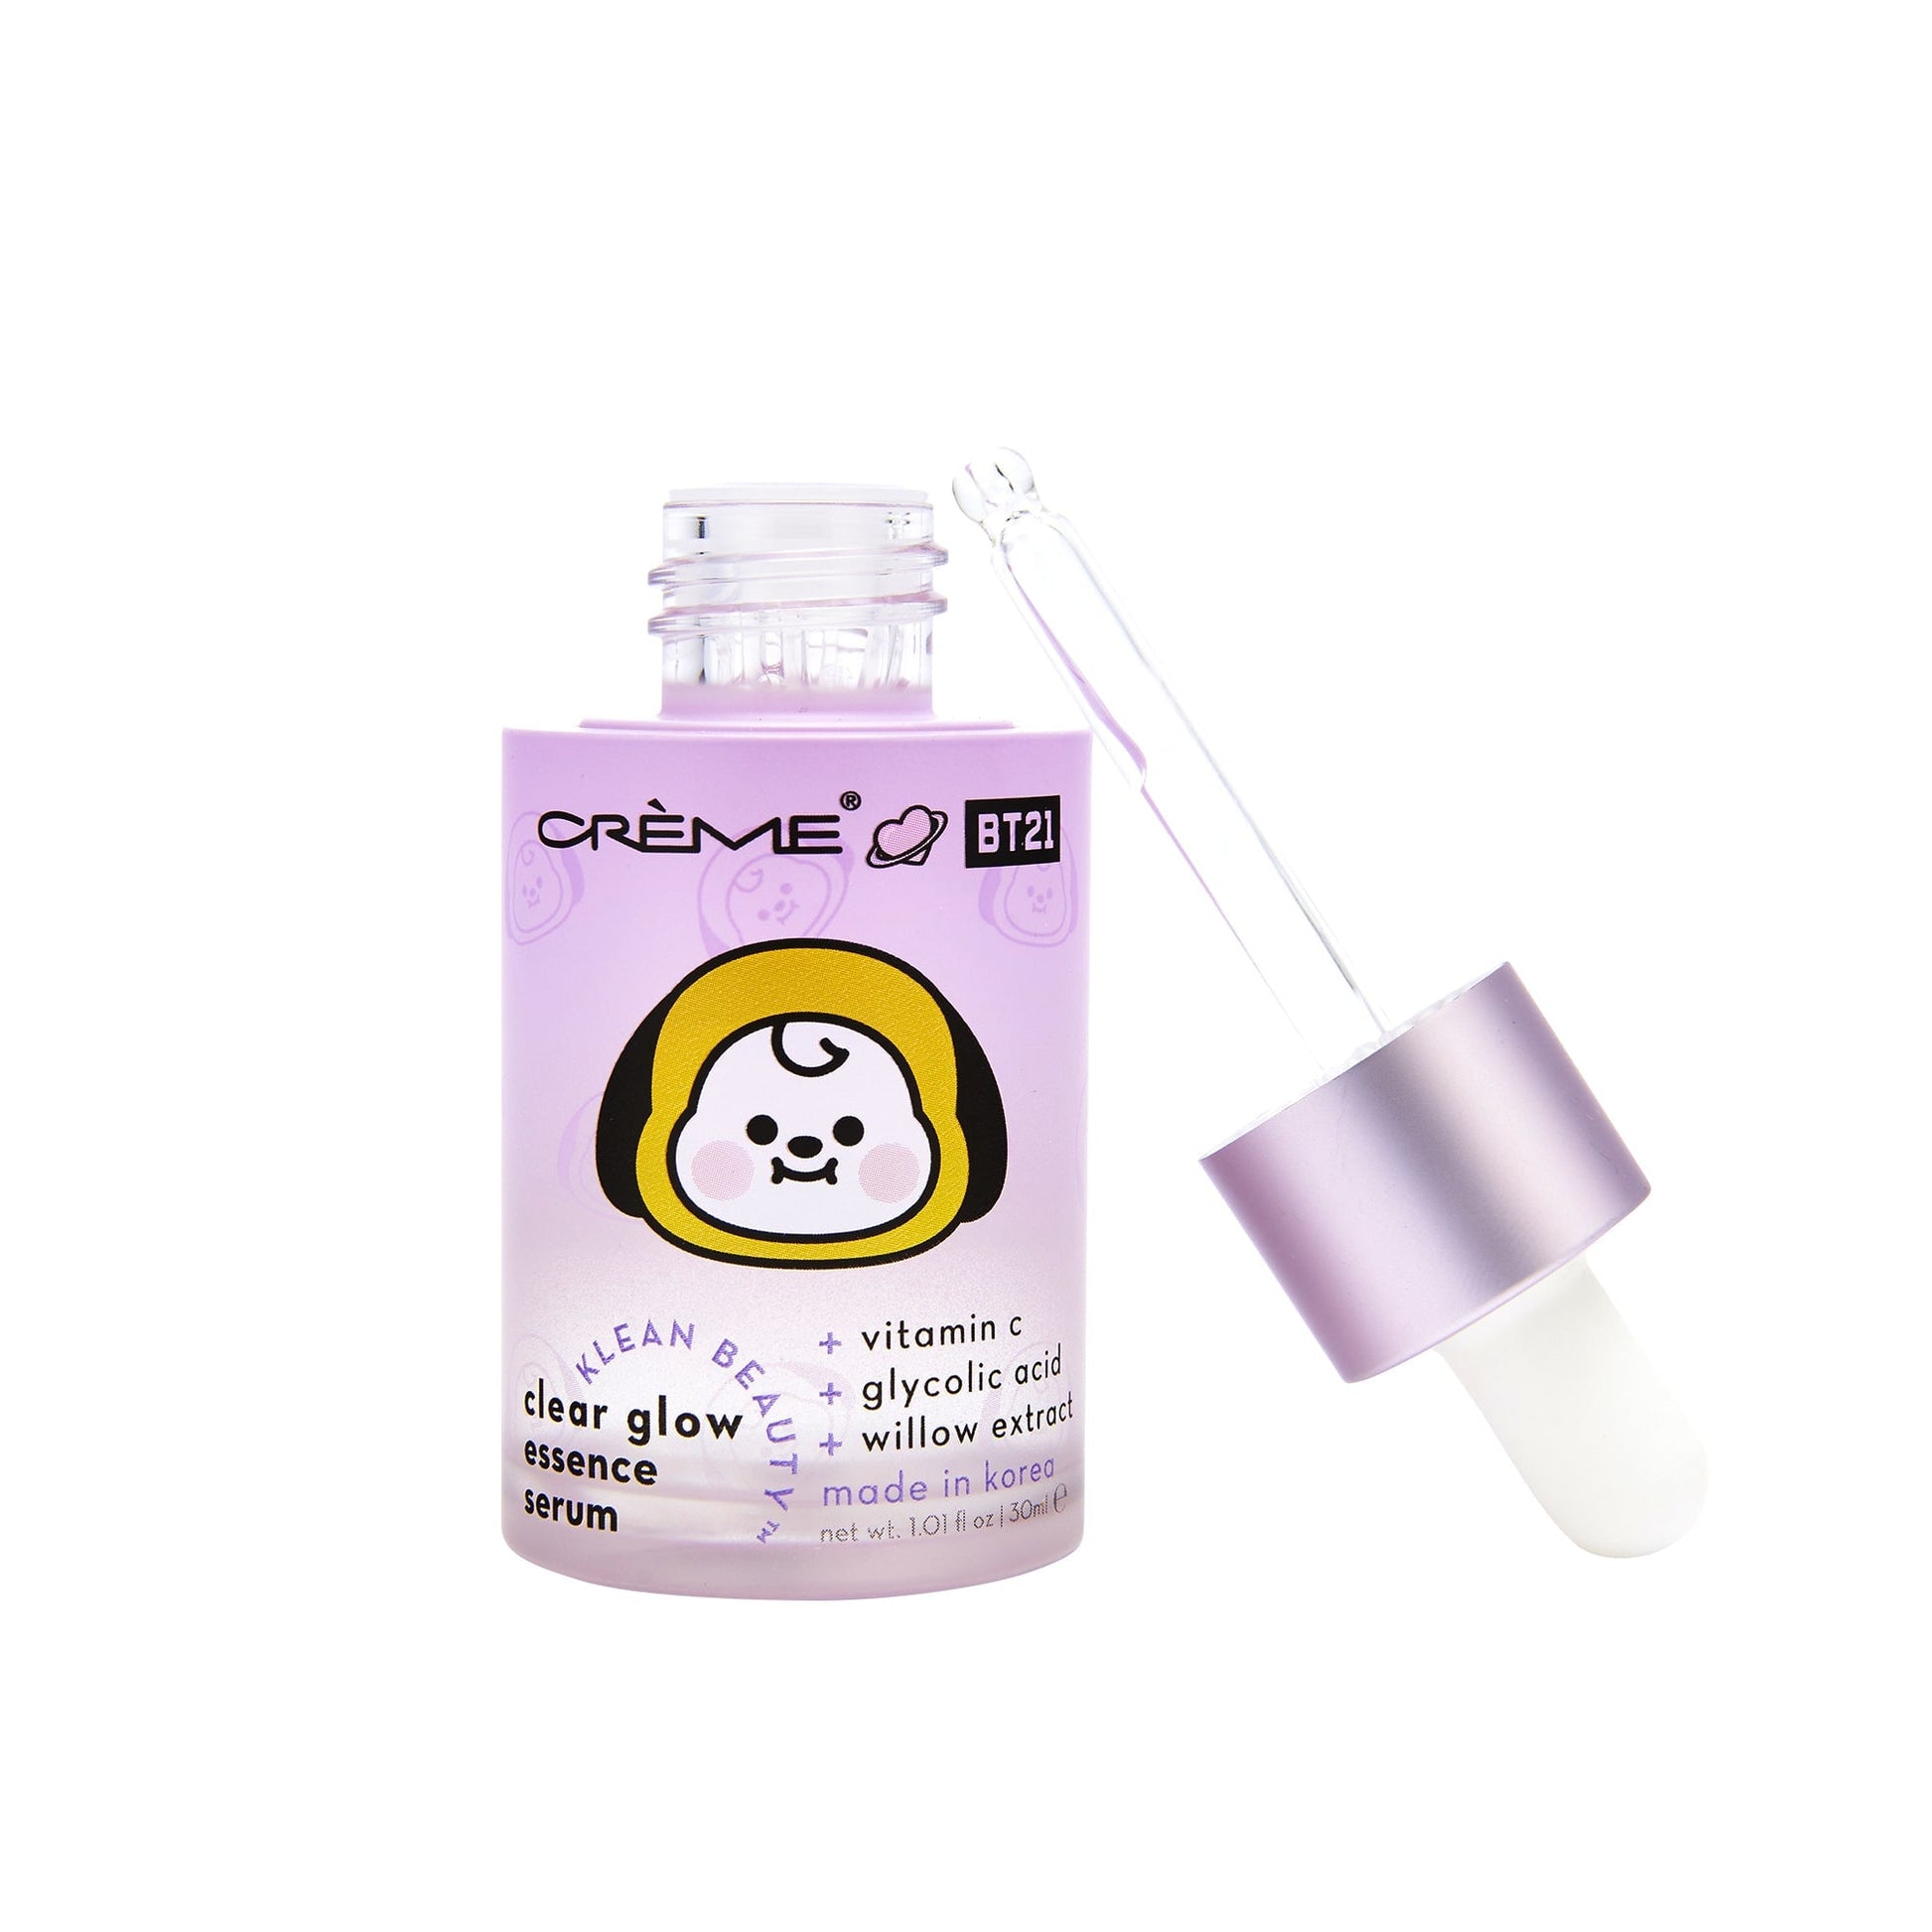 CHIMMY Clear Glow Essence Serum - Klean Beauty™️ Skin Care The Crème Shop x BT21 BABY 